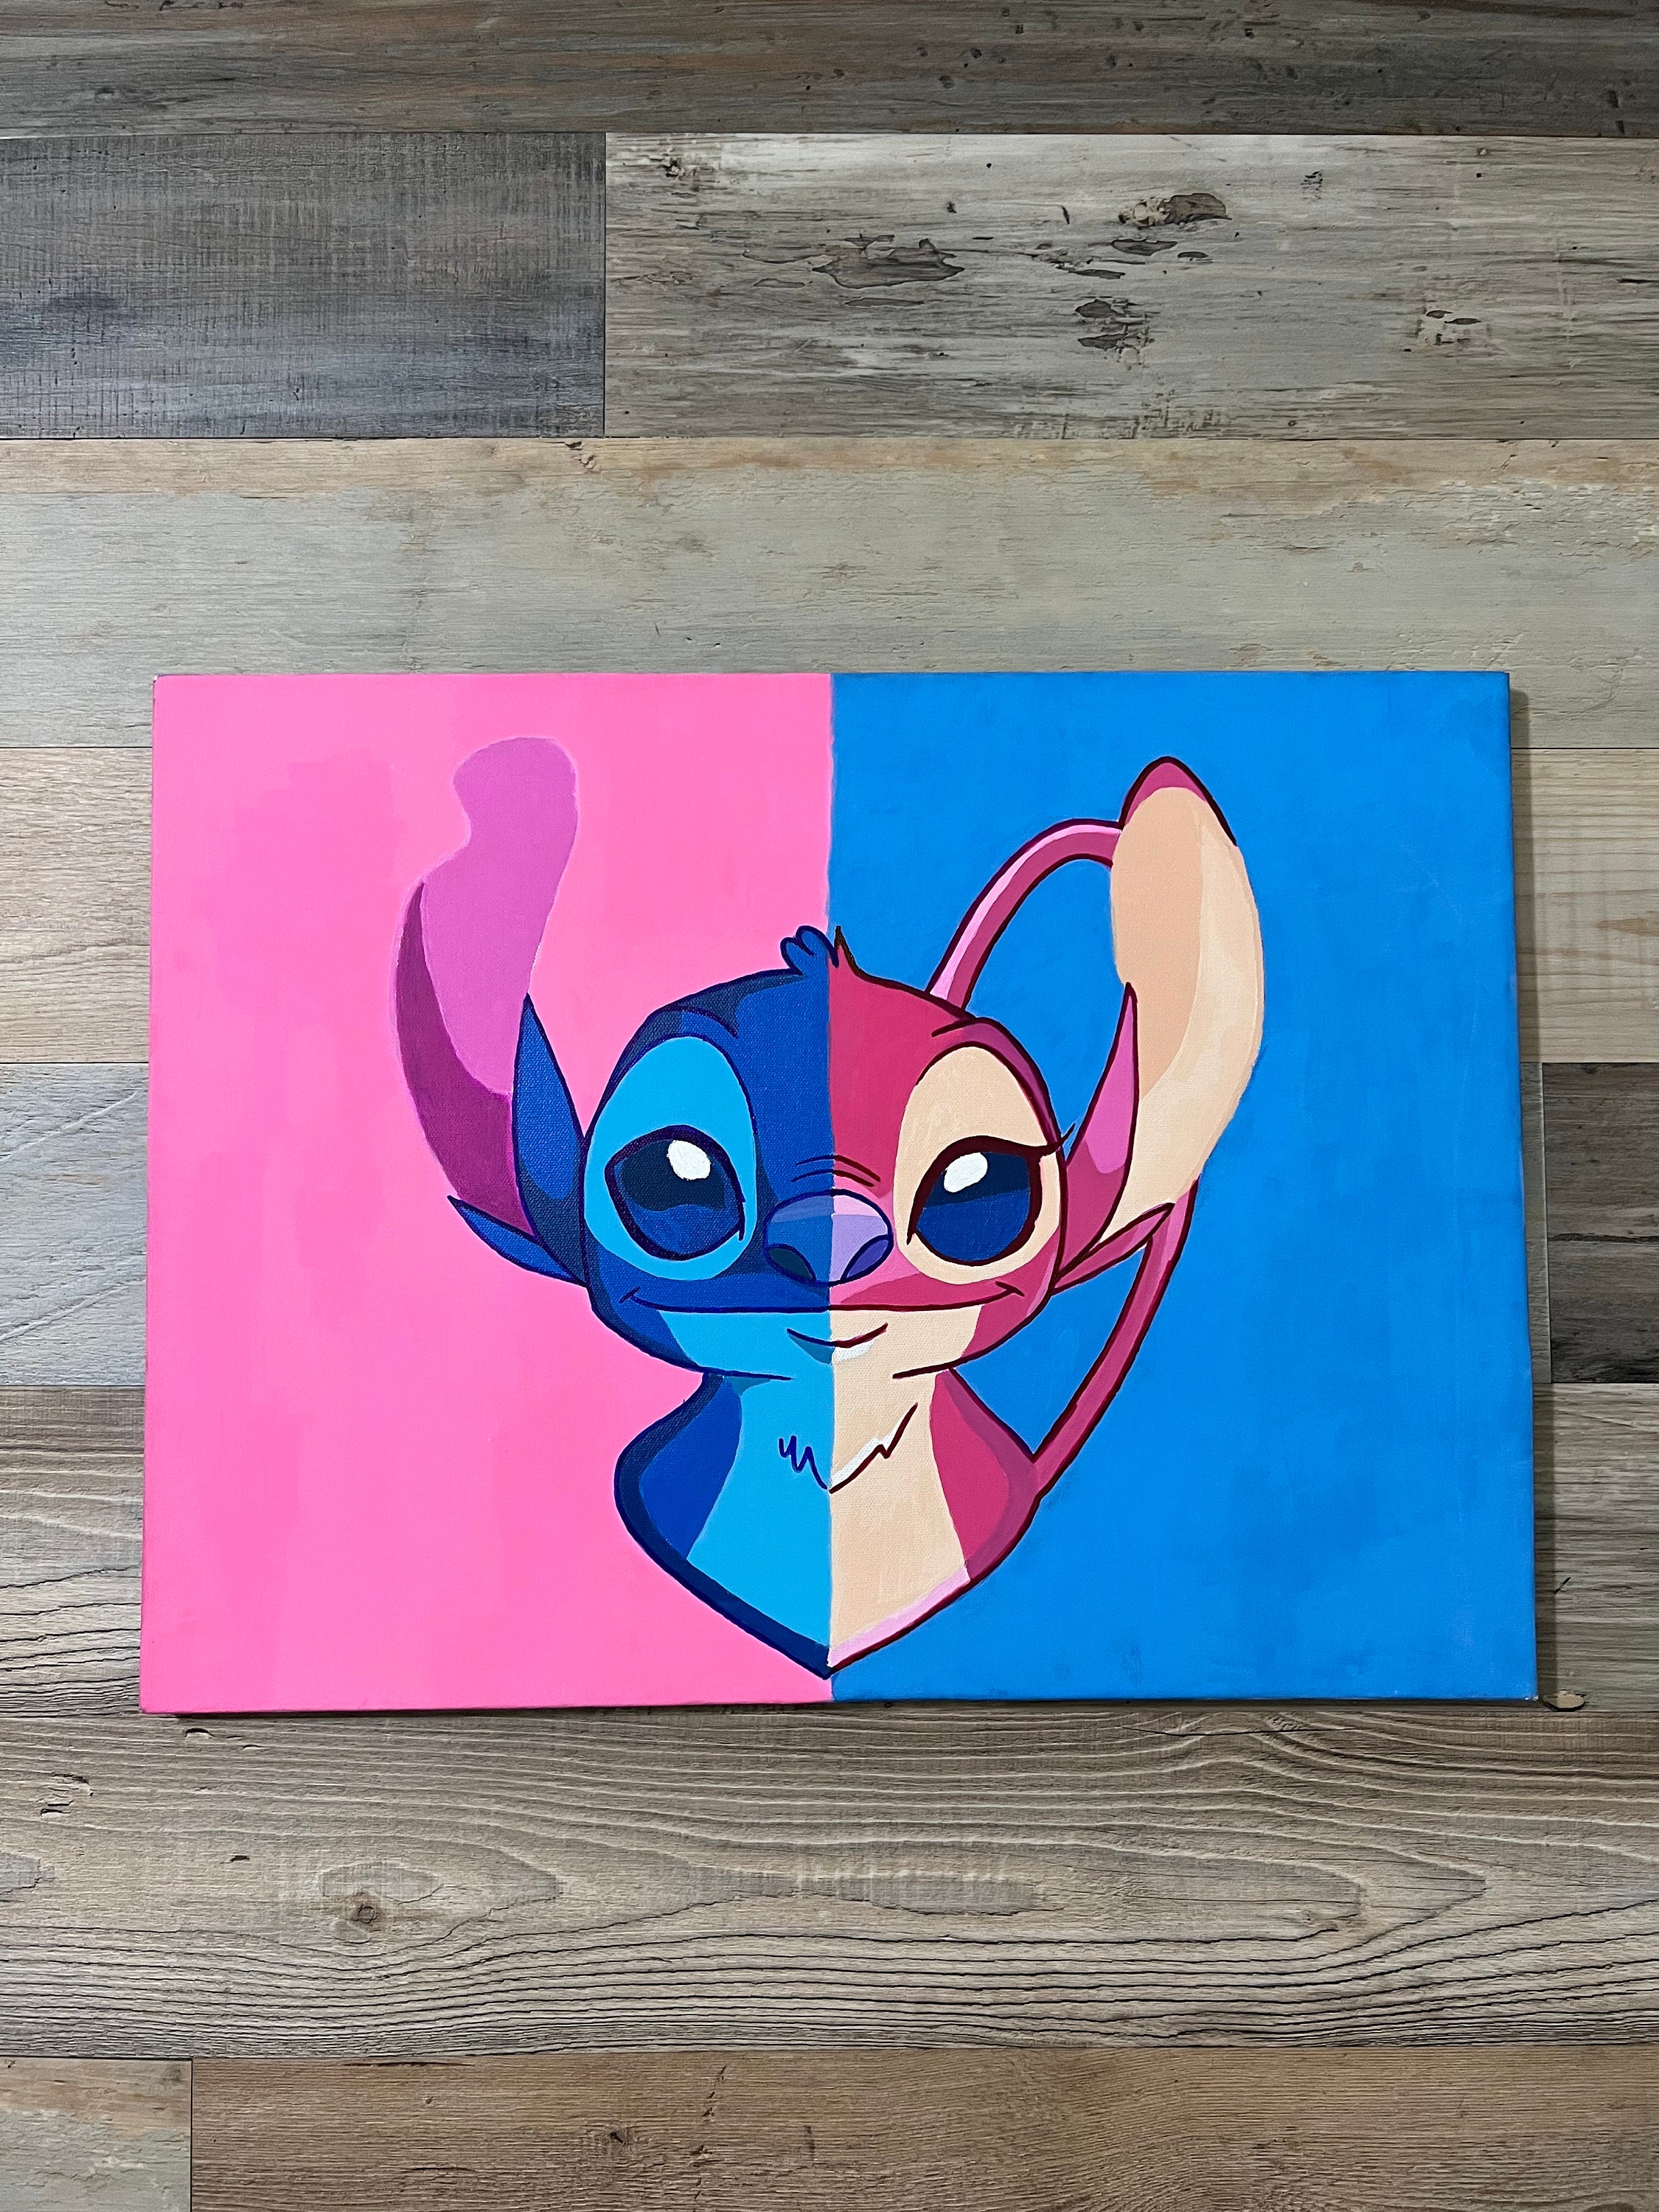 Super Stitch Underwear on Head Sticking Out Tongue Acrylic Painting 8x10  Silly Cute Painting Wall Art Room Decor -  Canada